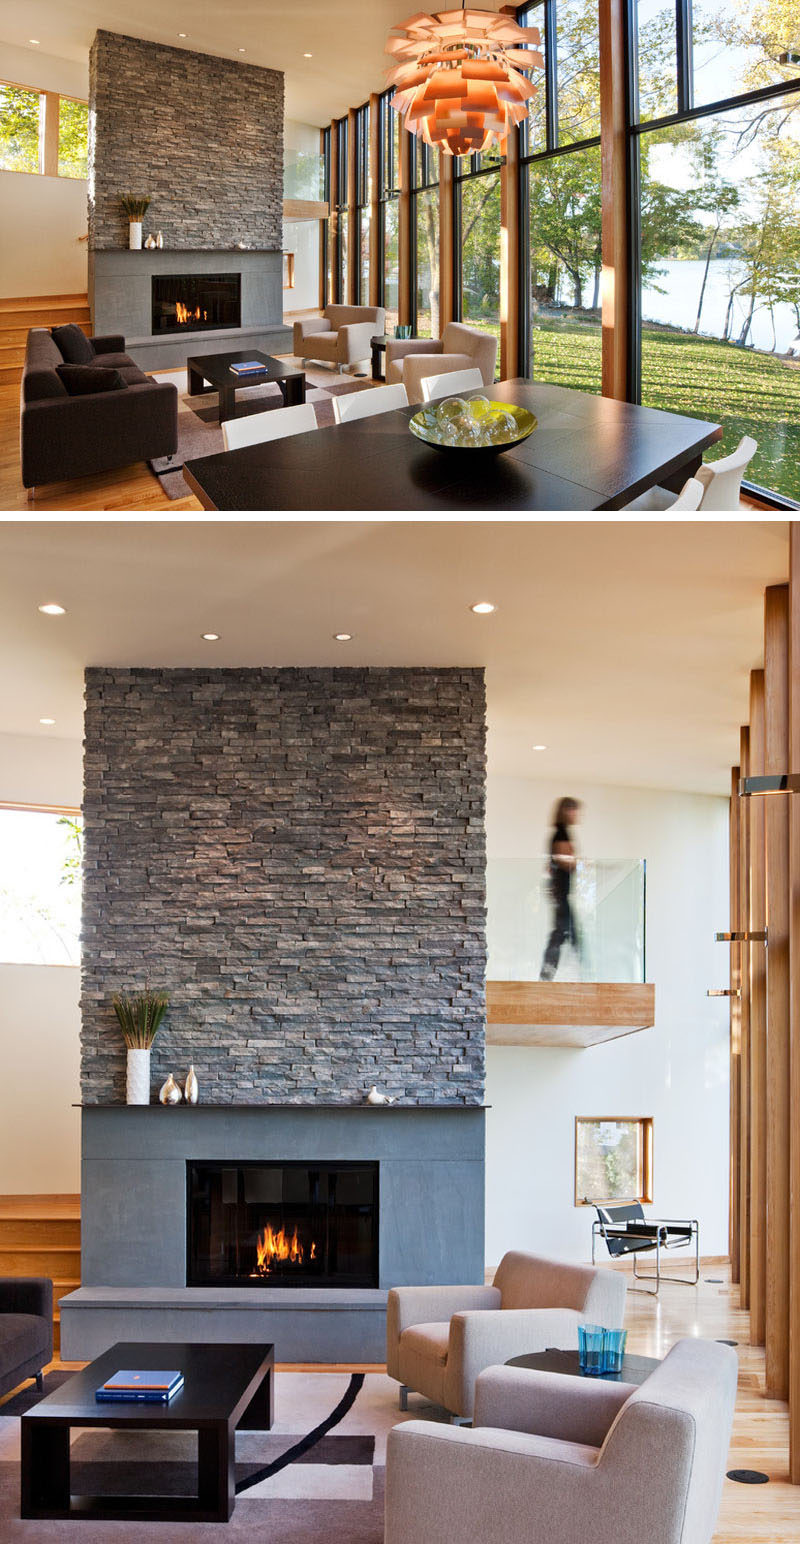 In this modern living room, a large gas fireplace covered in stone hides the staircase from view.